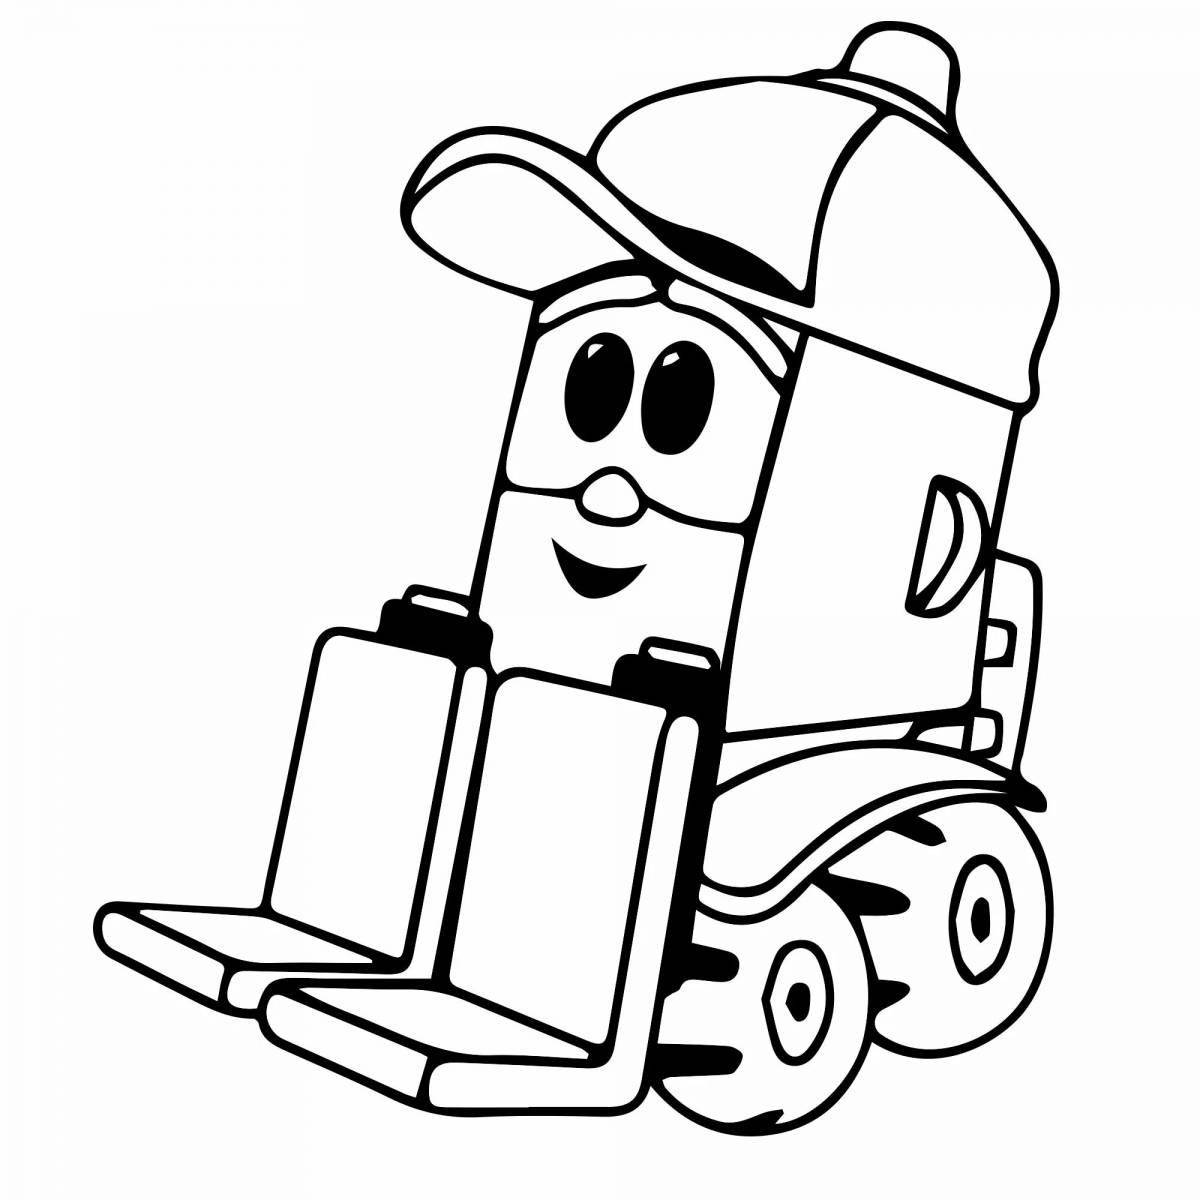 Coloring book prominent left cargo tractor